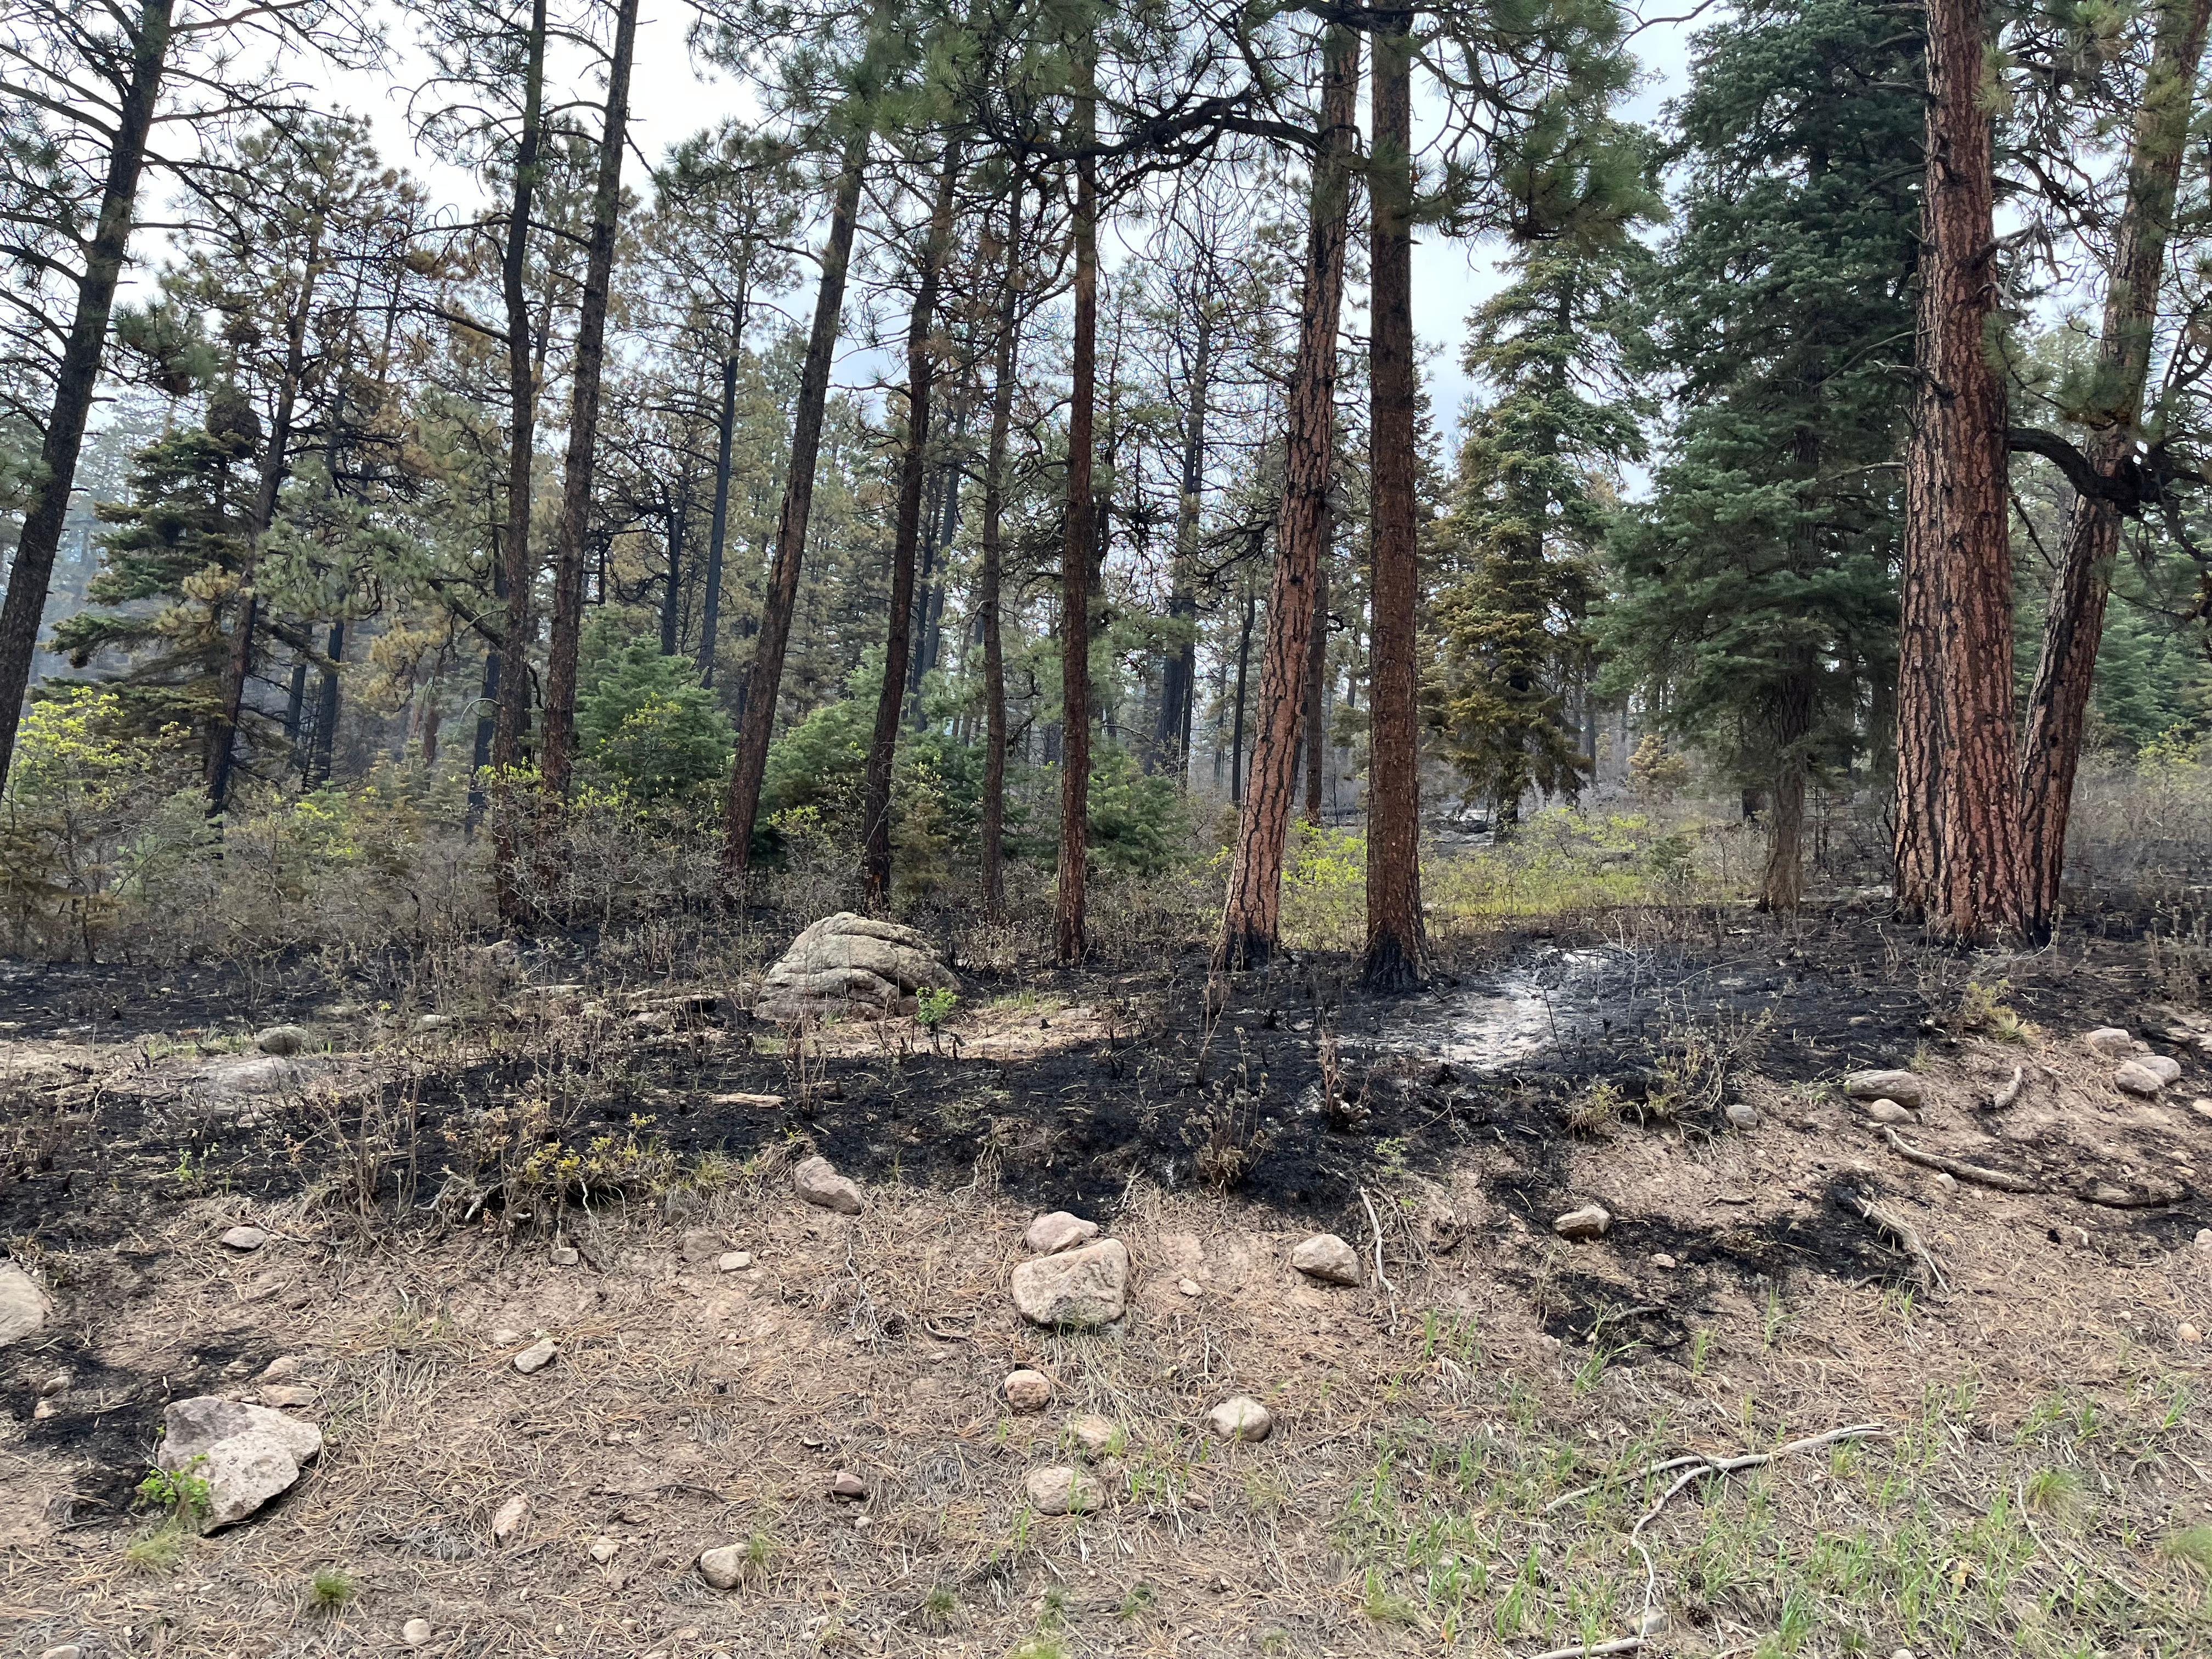 Fourmile Road fire effects